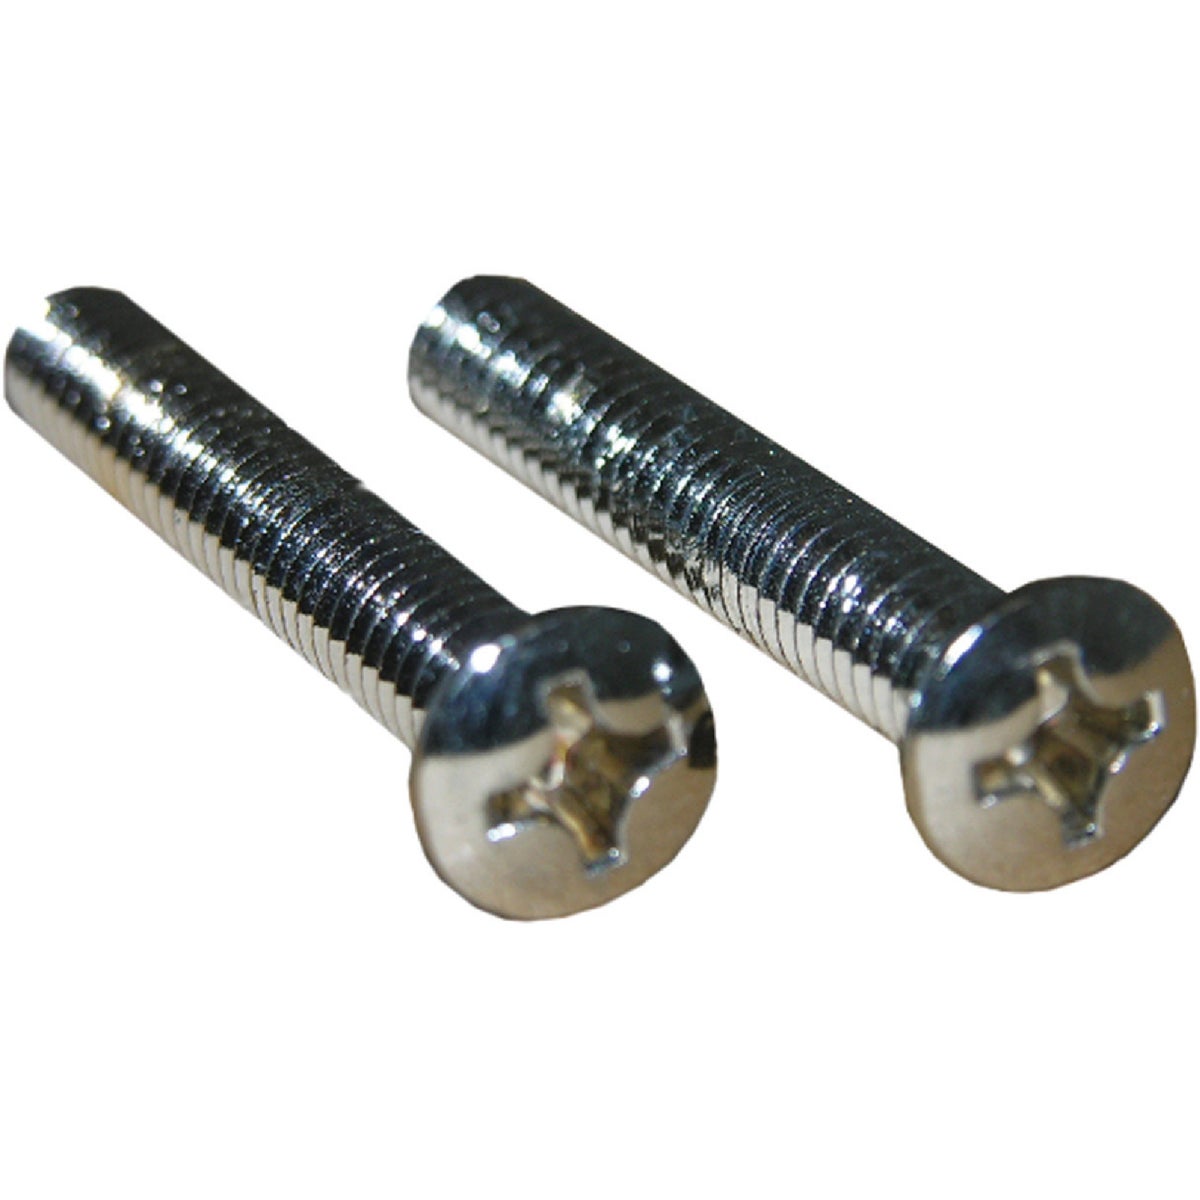 Lasco 1/4 In.-20 x 1-5/8 In. Chrome-Plated Overflow Bath Plate Screw (2-Pack)